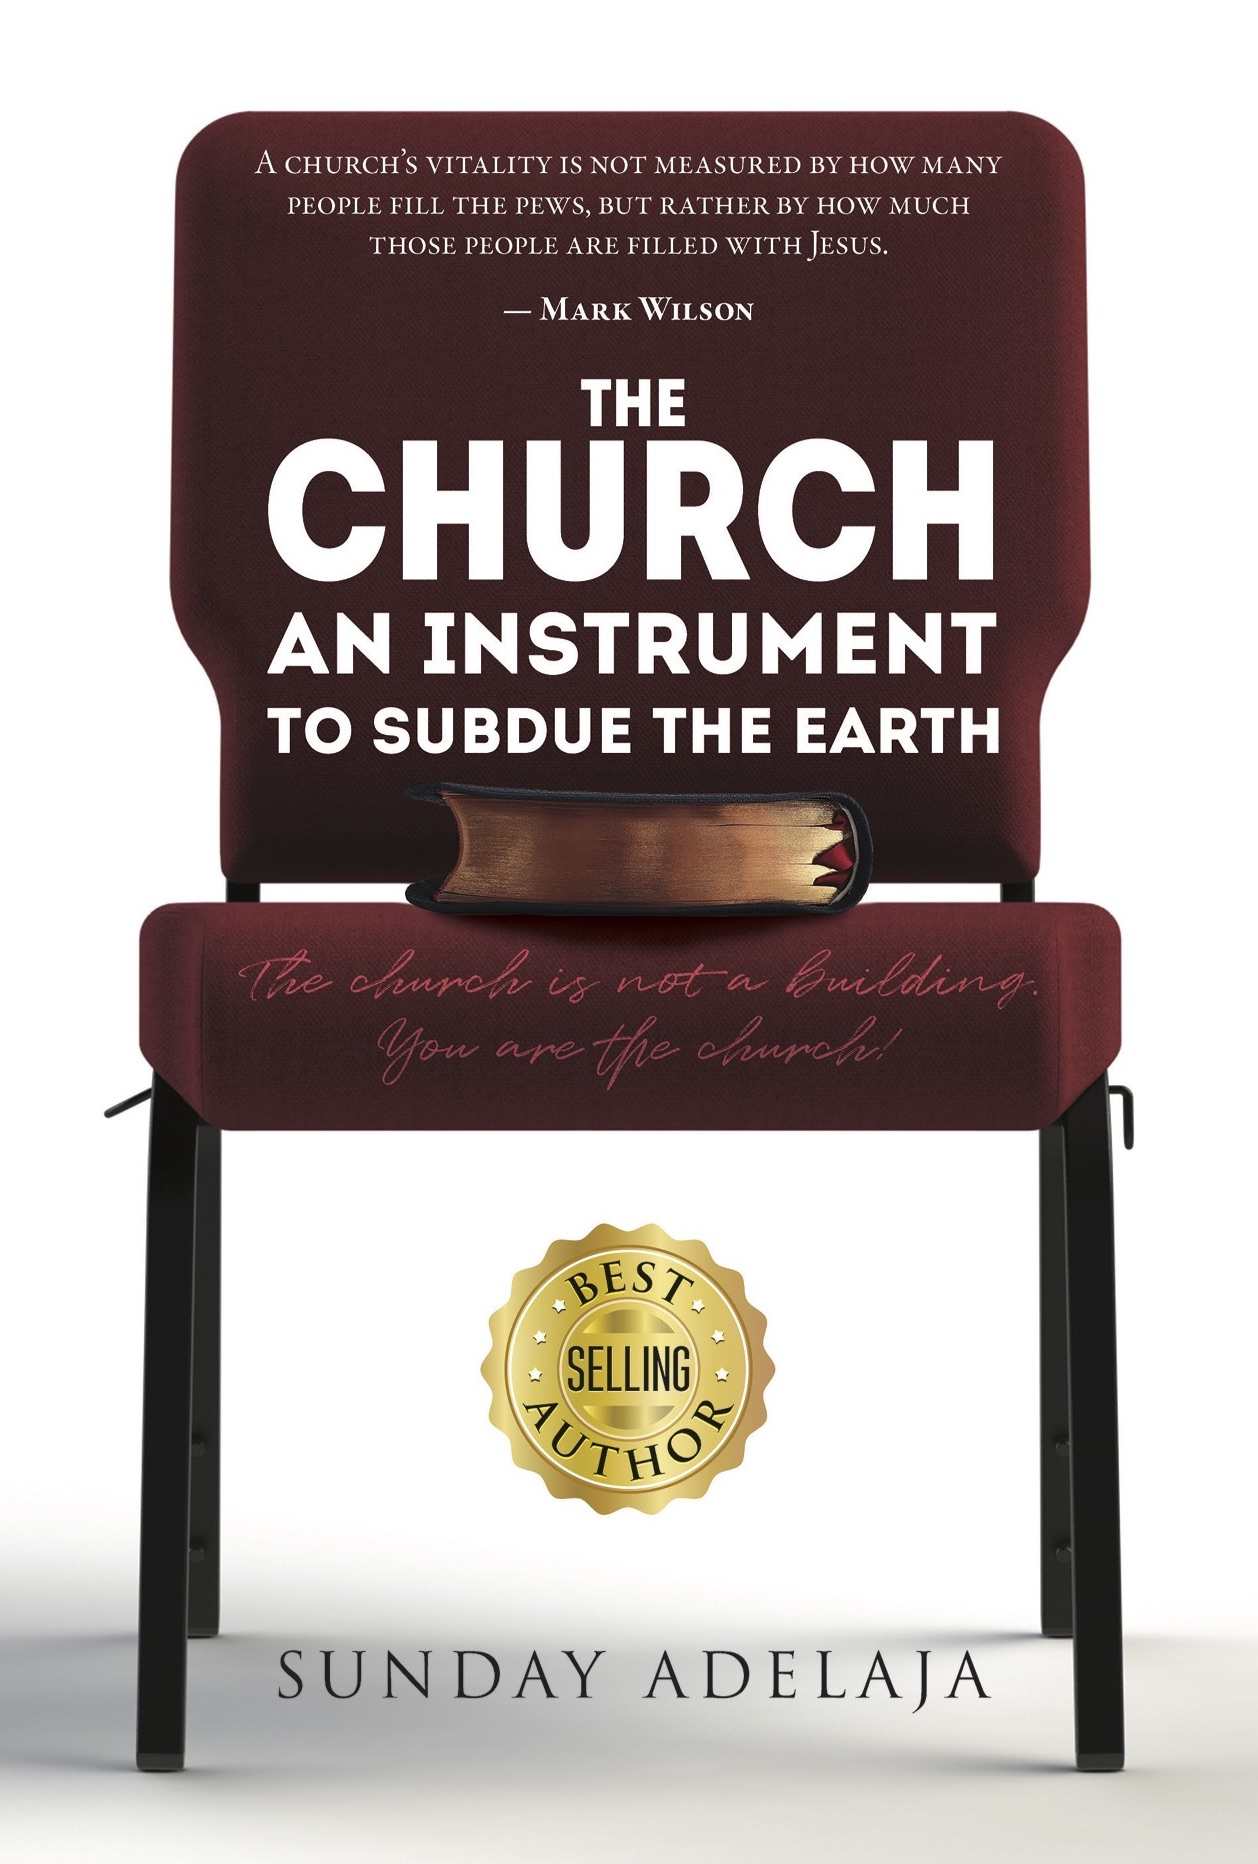 The-Church--An-Instrument-To-Subdue-The-Earth--The-church-is-not-a-building--You-are-the-church!-